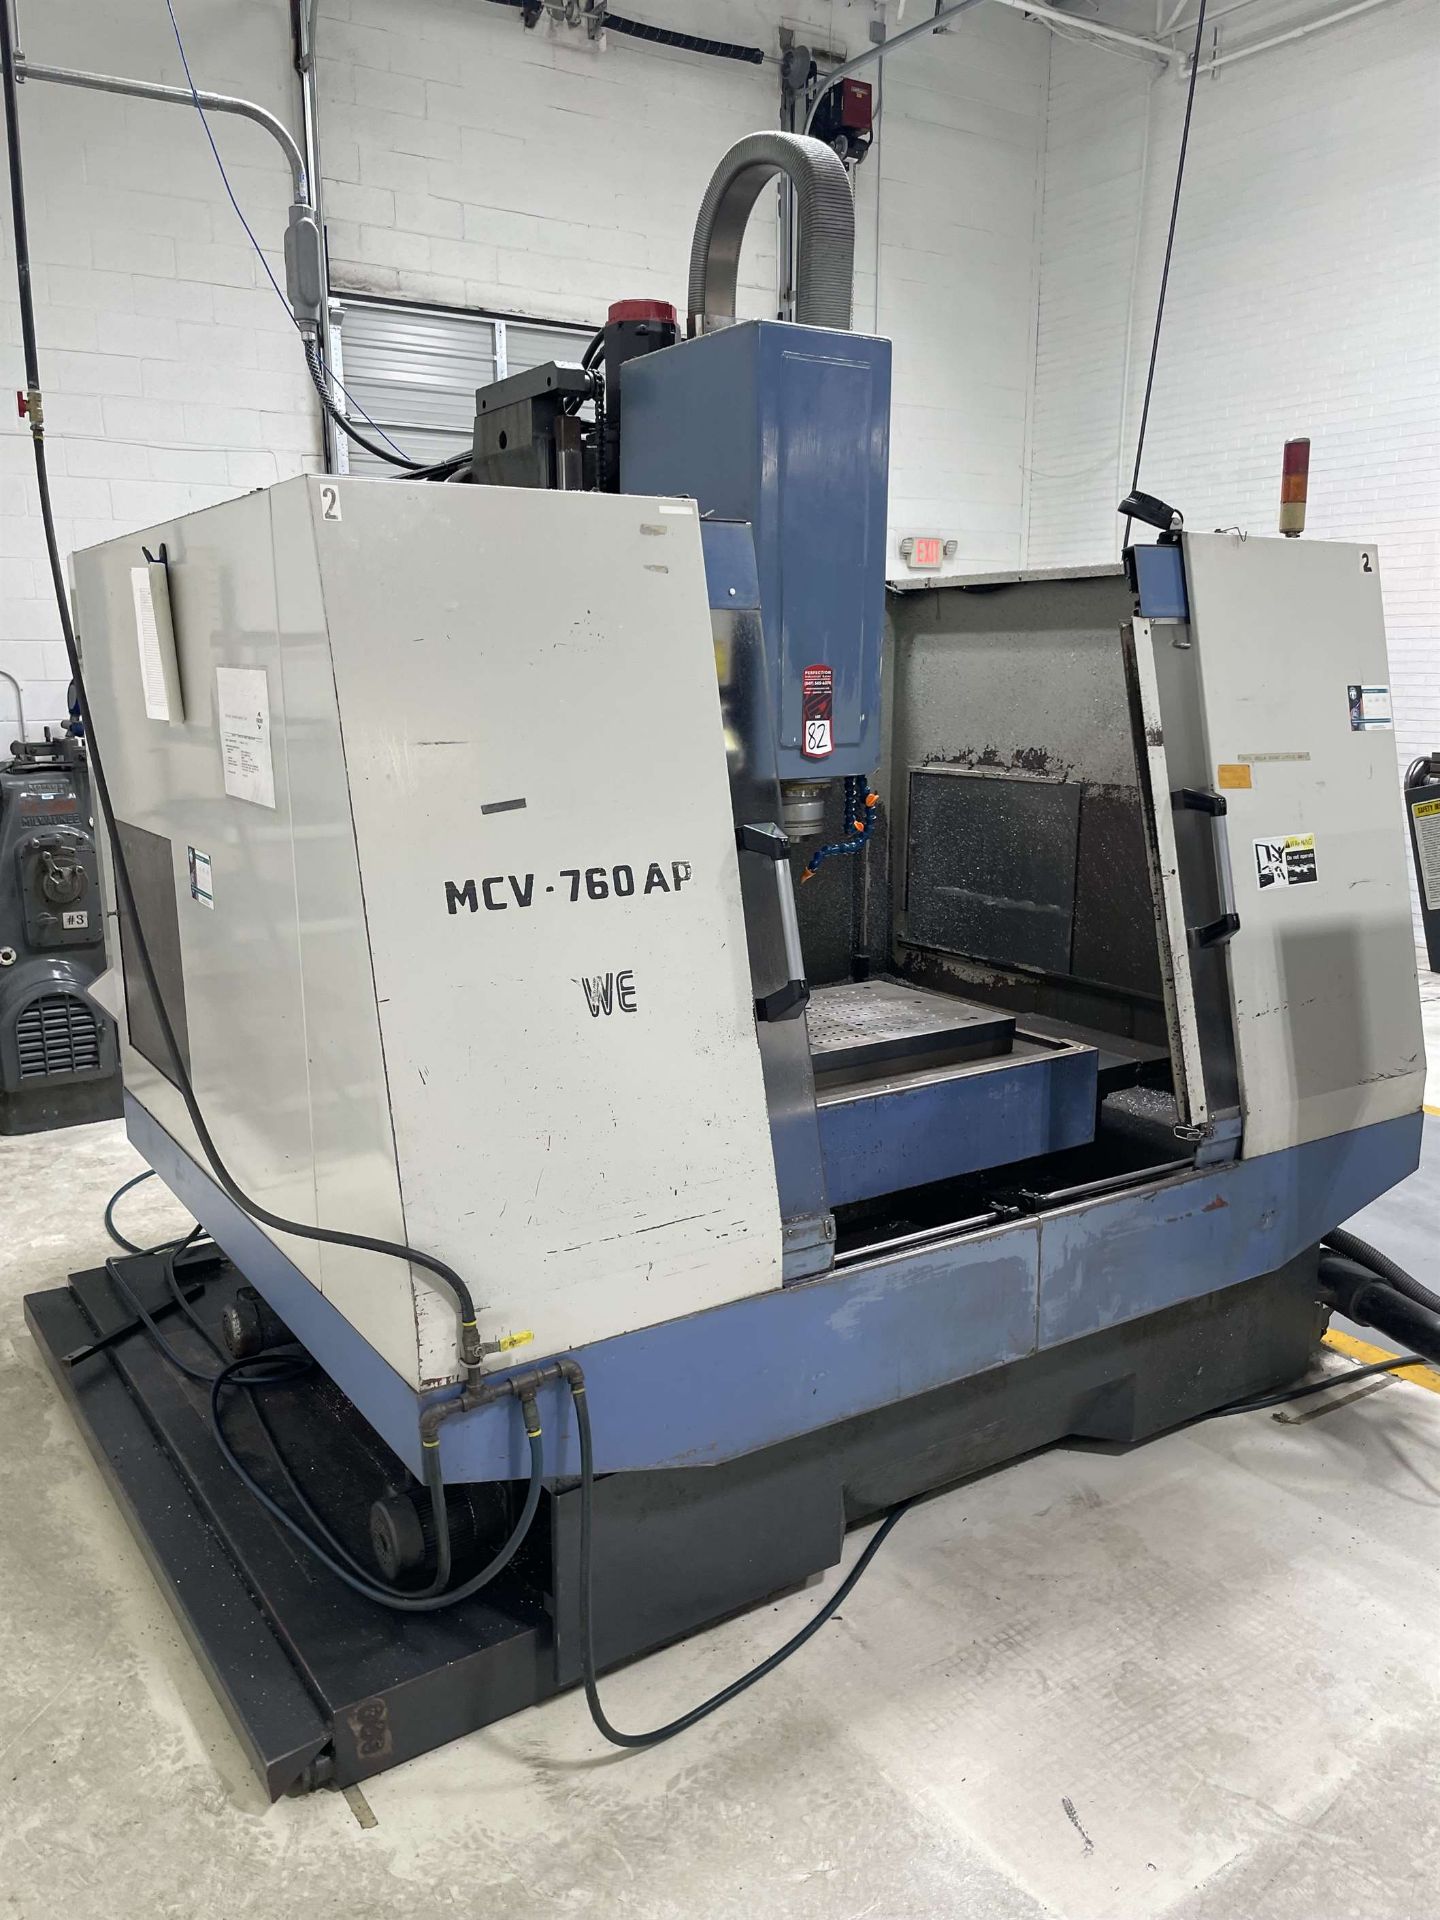 LEADWELL MCV760AP Vertical Machining Center, s/n L19102021 w/ FANUC OMF Control, 20” x 39” Table, BT - Image 2 of 8